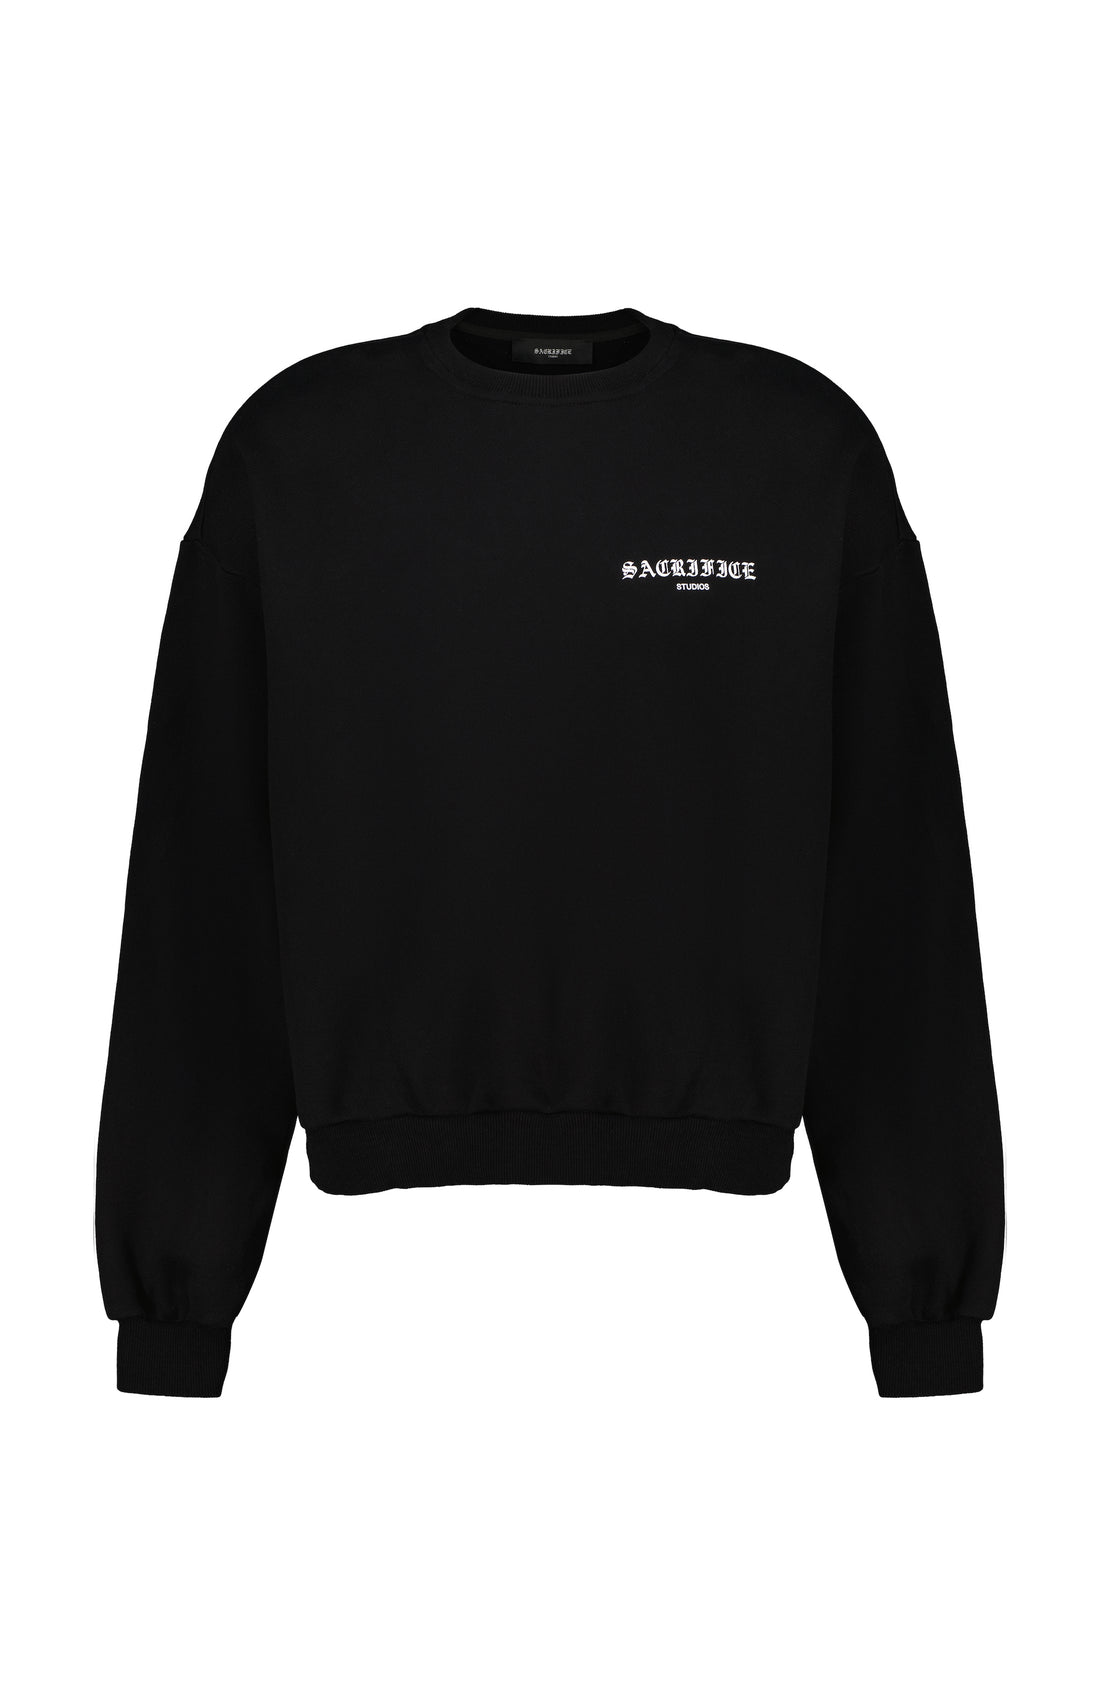 Premium Streetwear Heavy-weight Sweatshirt. Expertly crafted in Portugal. Located in Dubai.